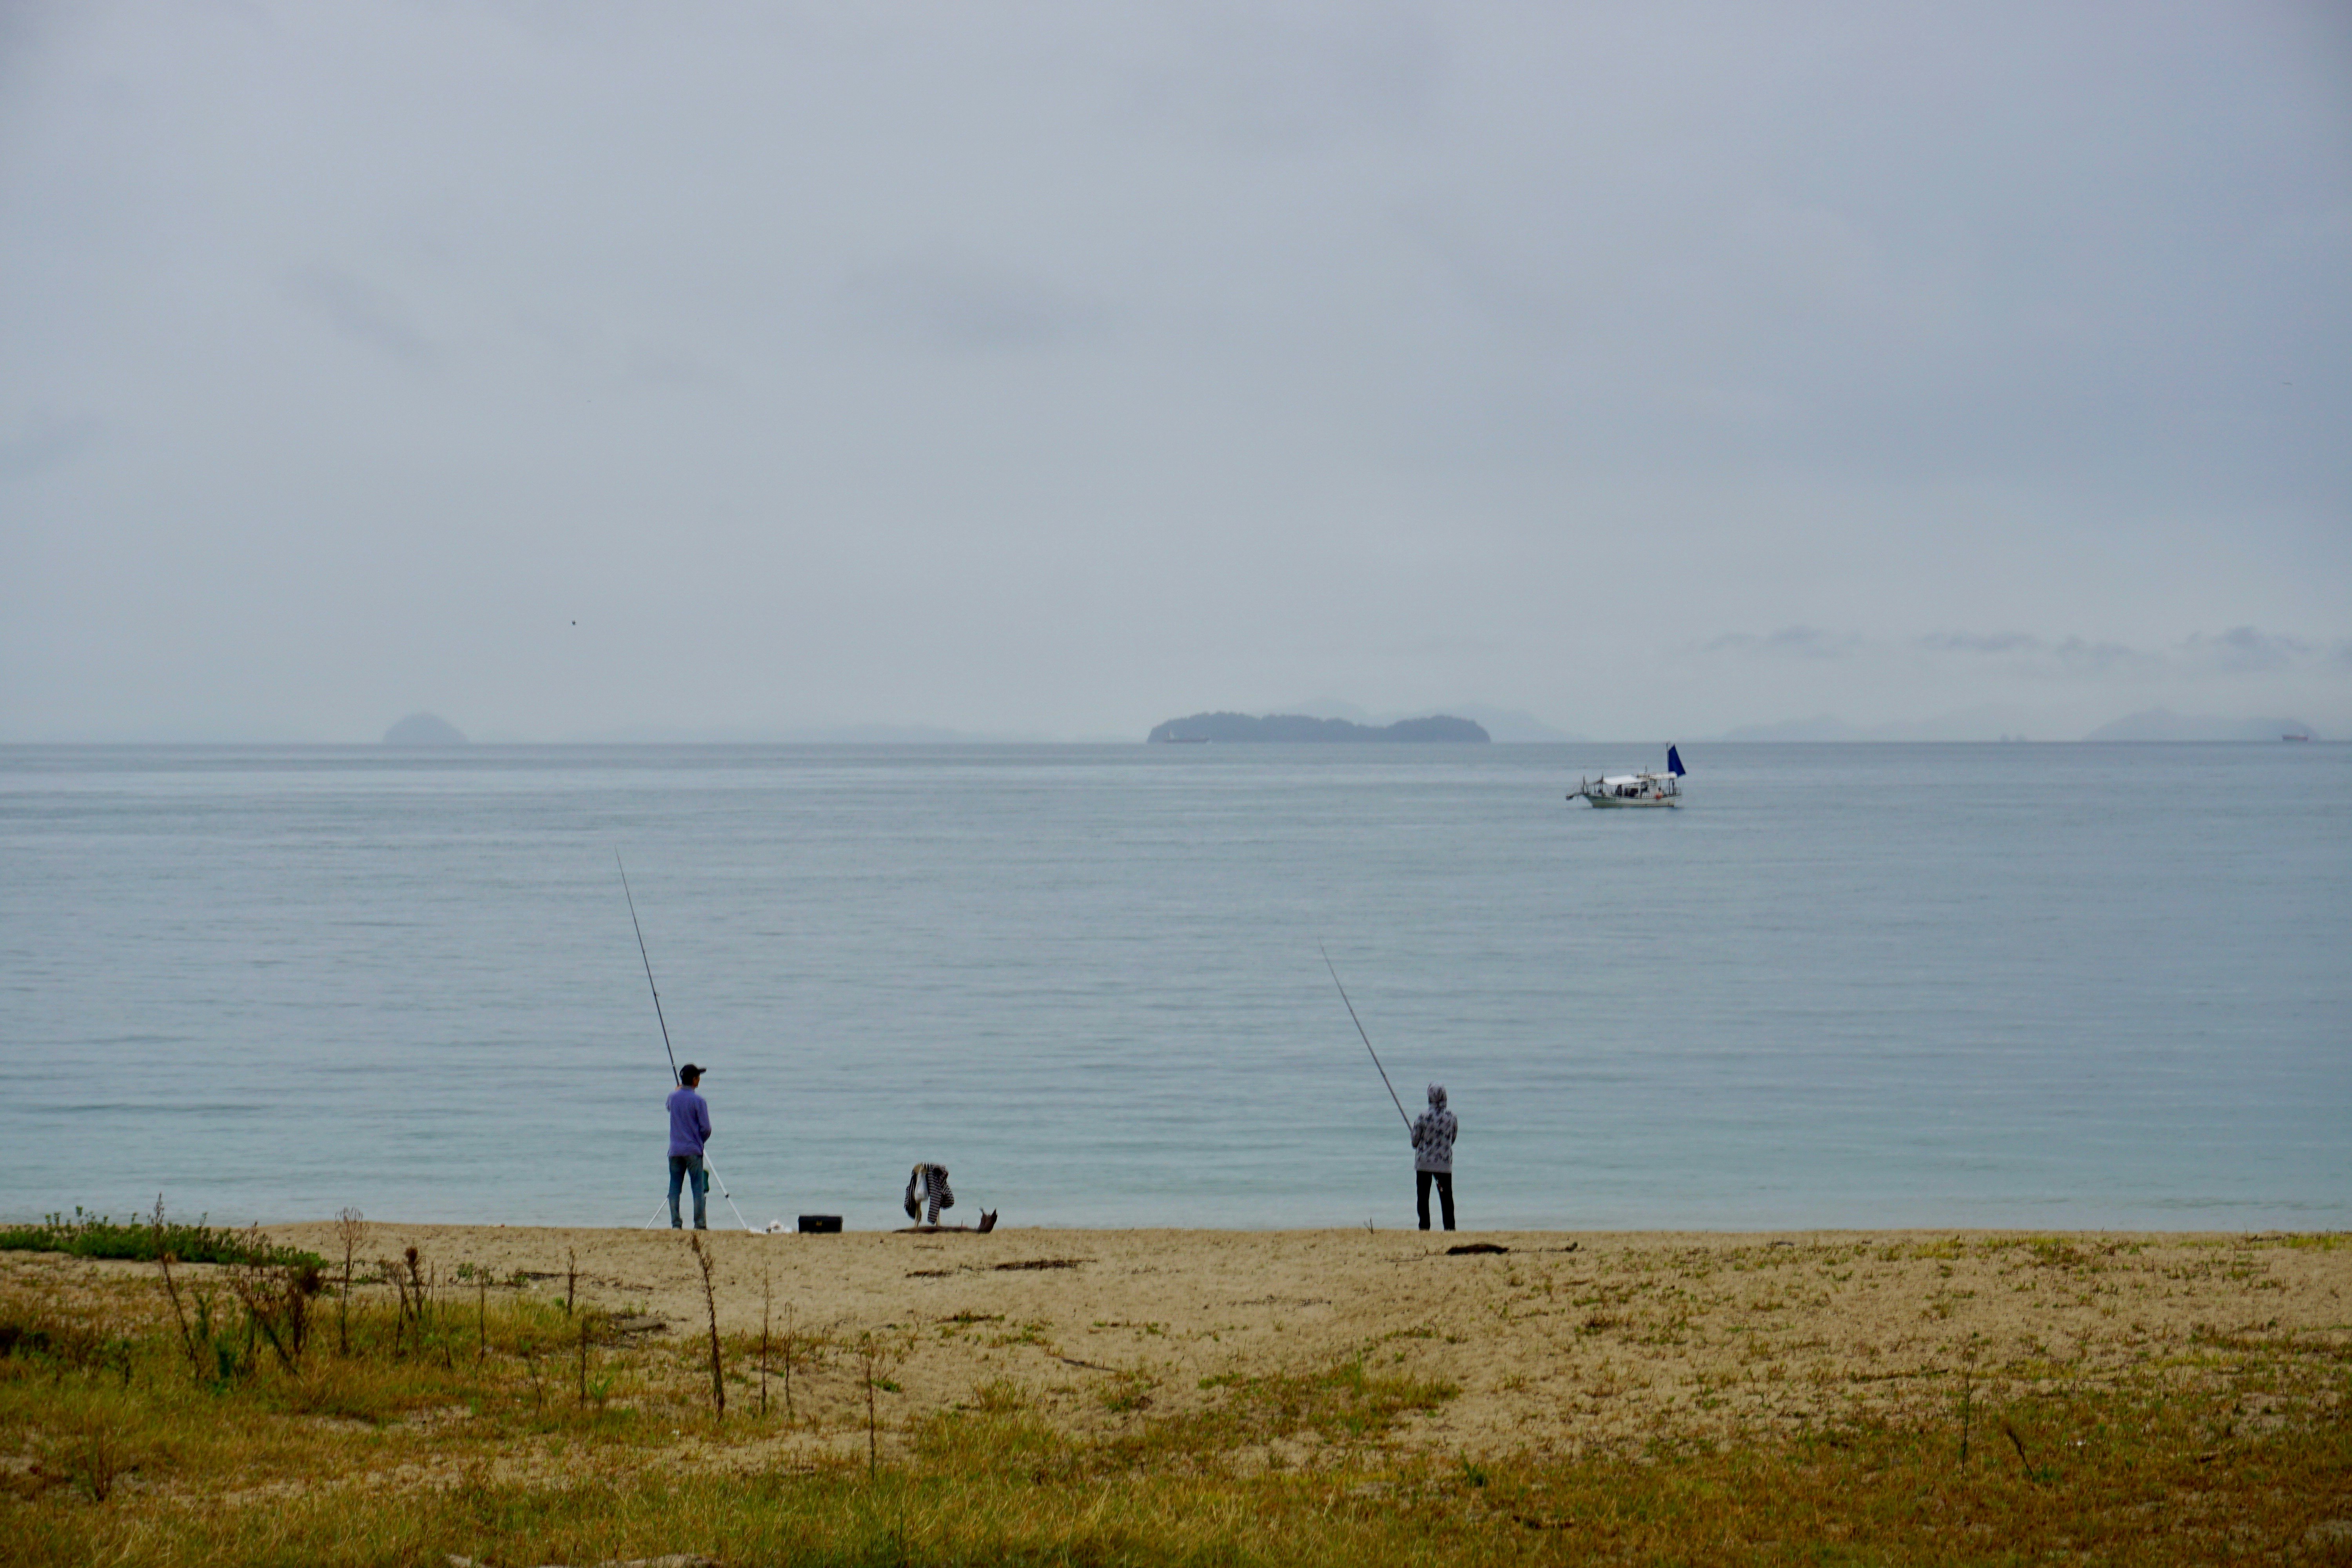 Two fishermen, one in a purple shirt and dark jeans and the other in a grey and black sweater and black slacks face the Seto Inland Sea with long fishing poles. In the distance is a white fishing boat with a navy blue sail, and even further in the distance are several small, mountainous islands almost obscured by the haze.